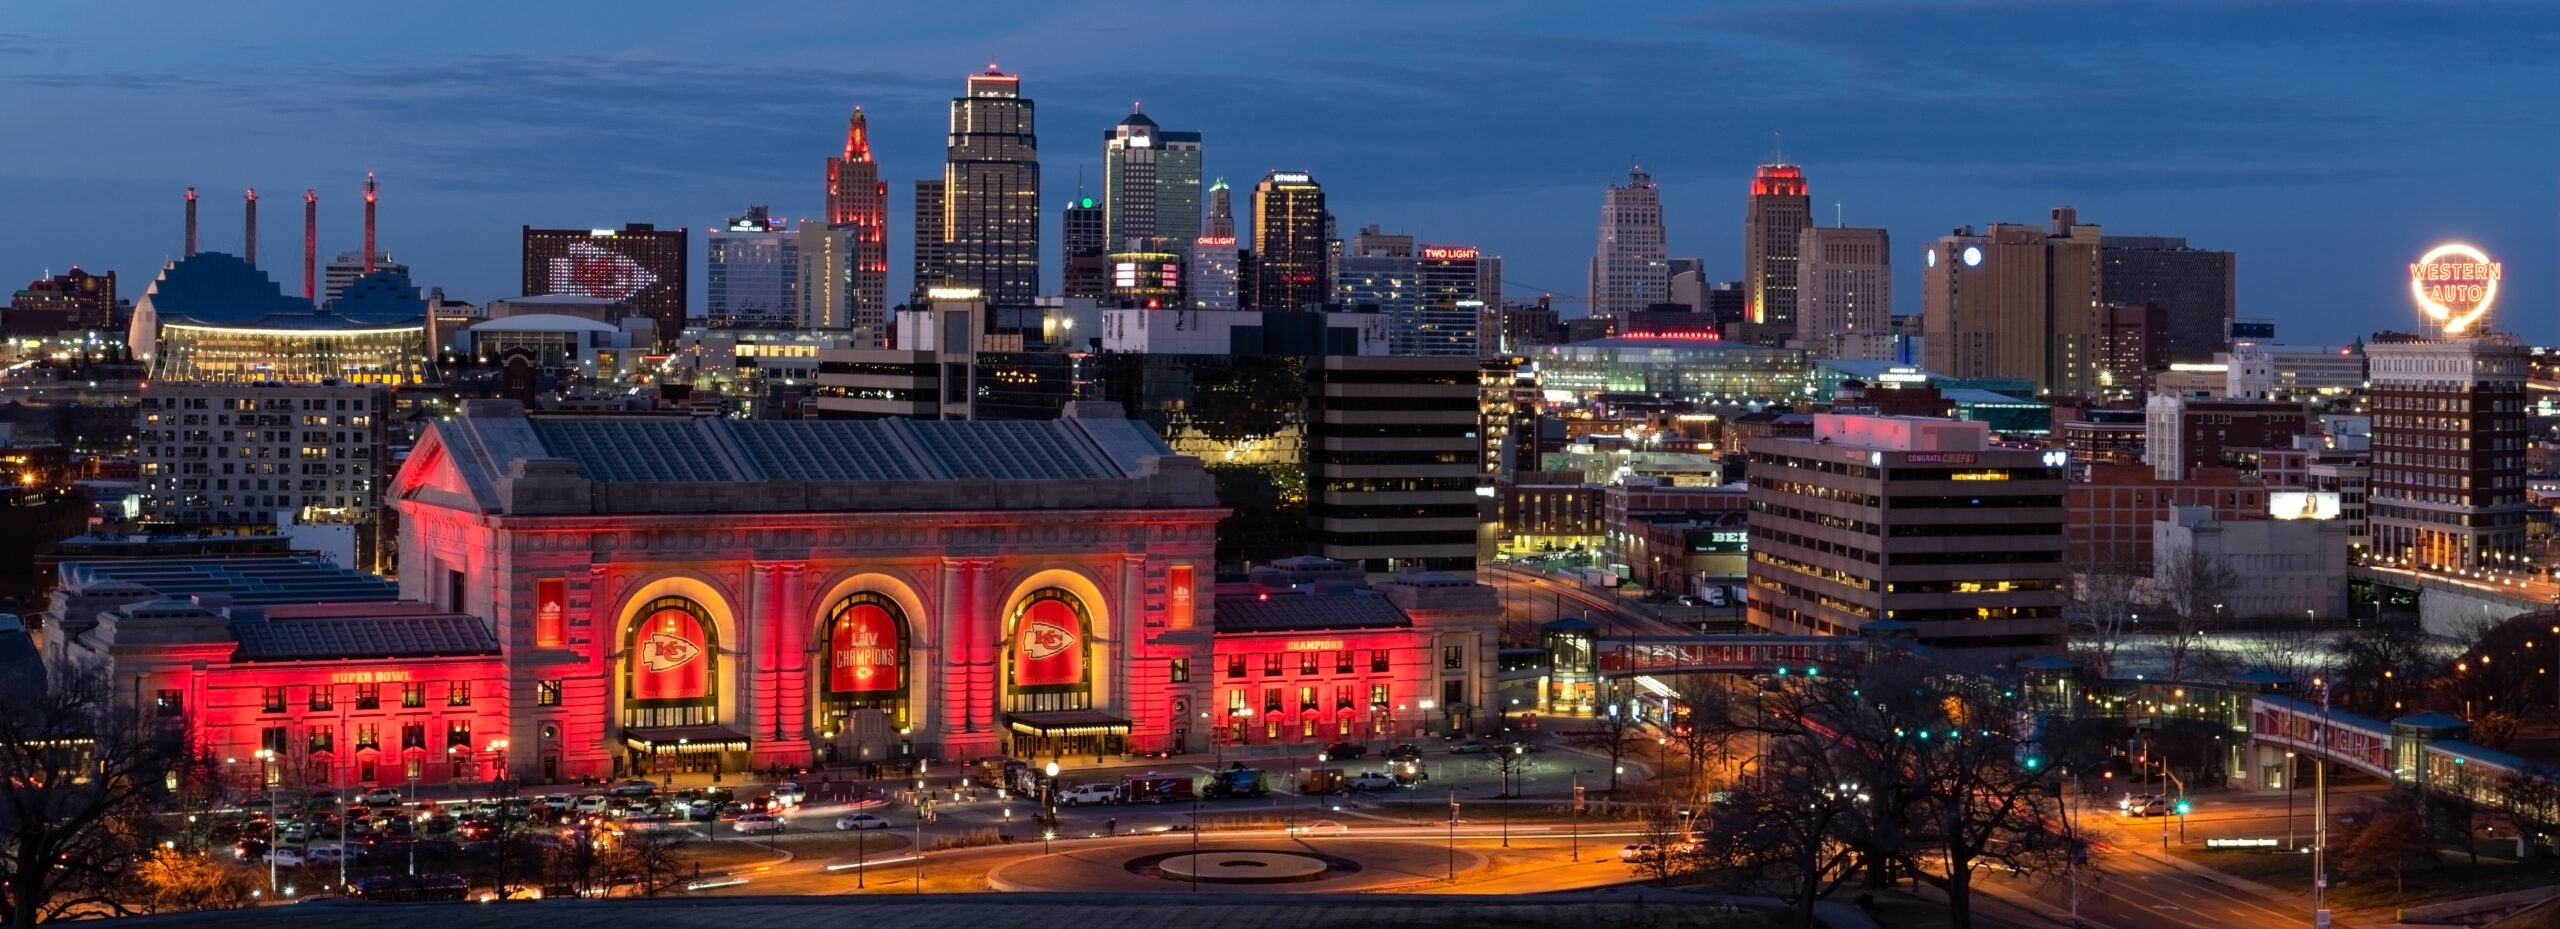 Union Station and cityscape